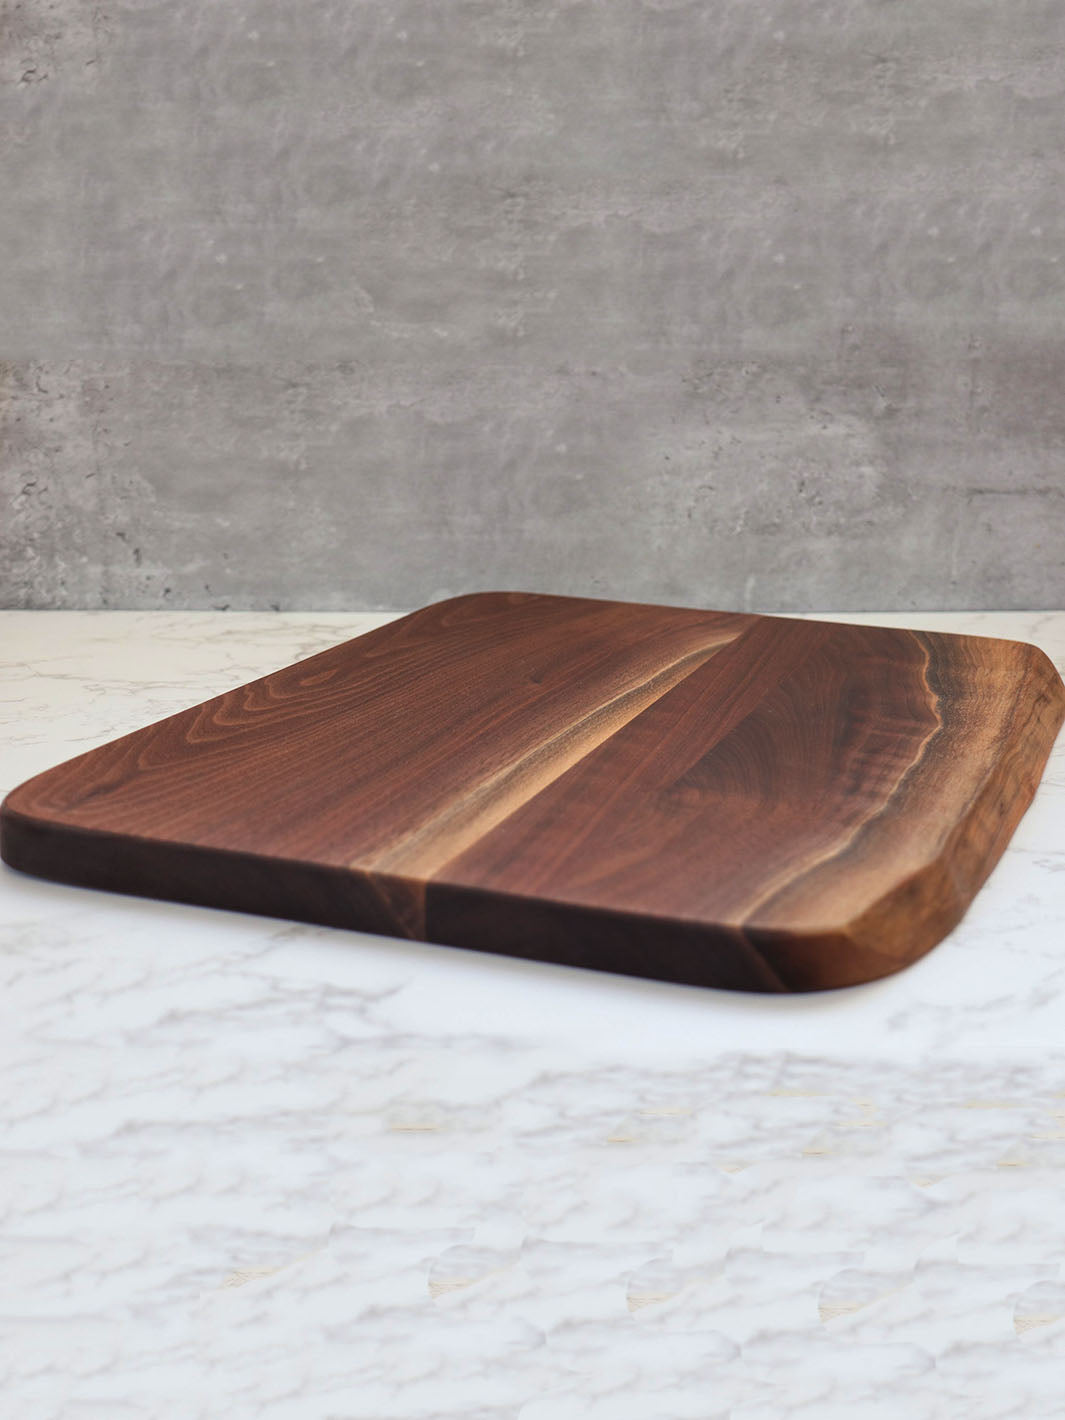 Earthly Comfort Large Walnut Live Edge Cutting Board Earthly Comfort Cutting Board 1968-3